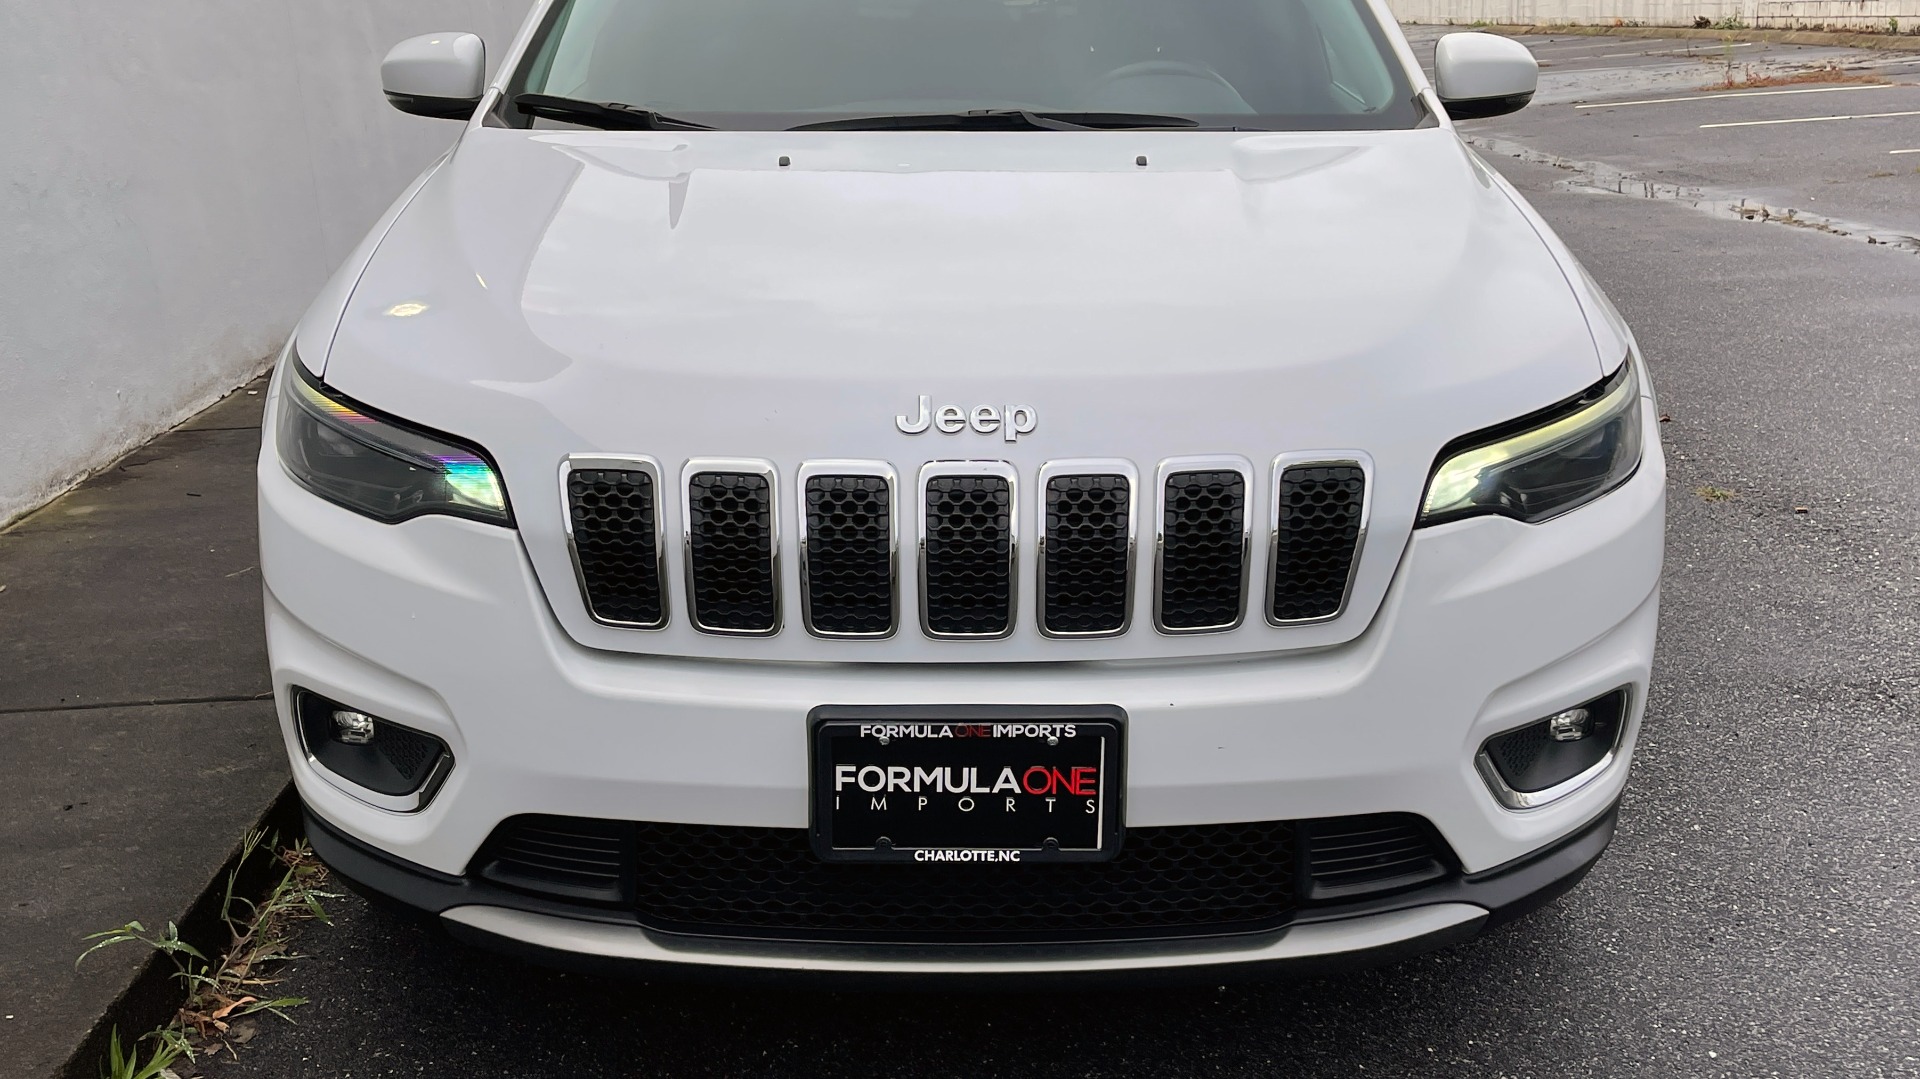 Used 2019 Jeep CHEROKEE LIMITED 2.4L / FWD / APPLE CARPLAY / KEYLESS-GO / REARVIEW for sale Sold at Formula Imports in Charlotte NC 28227 9